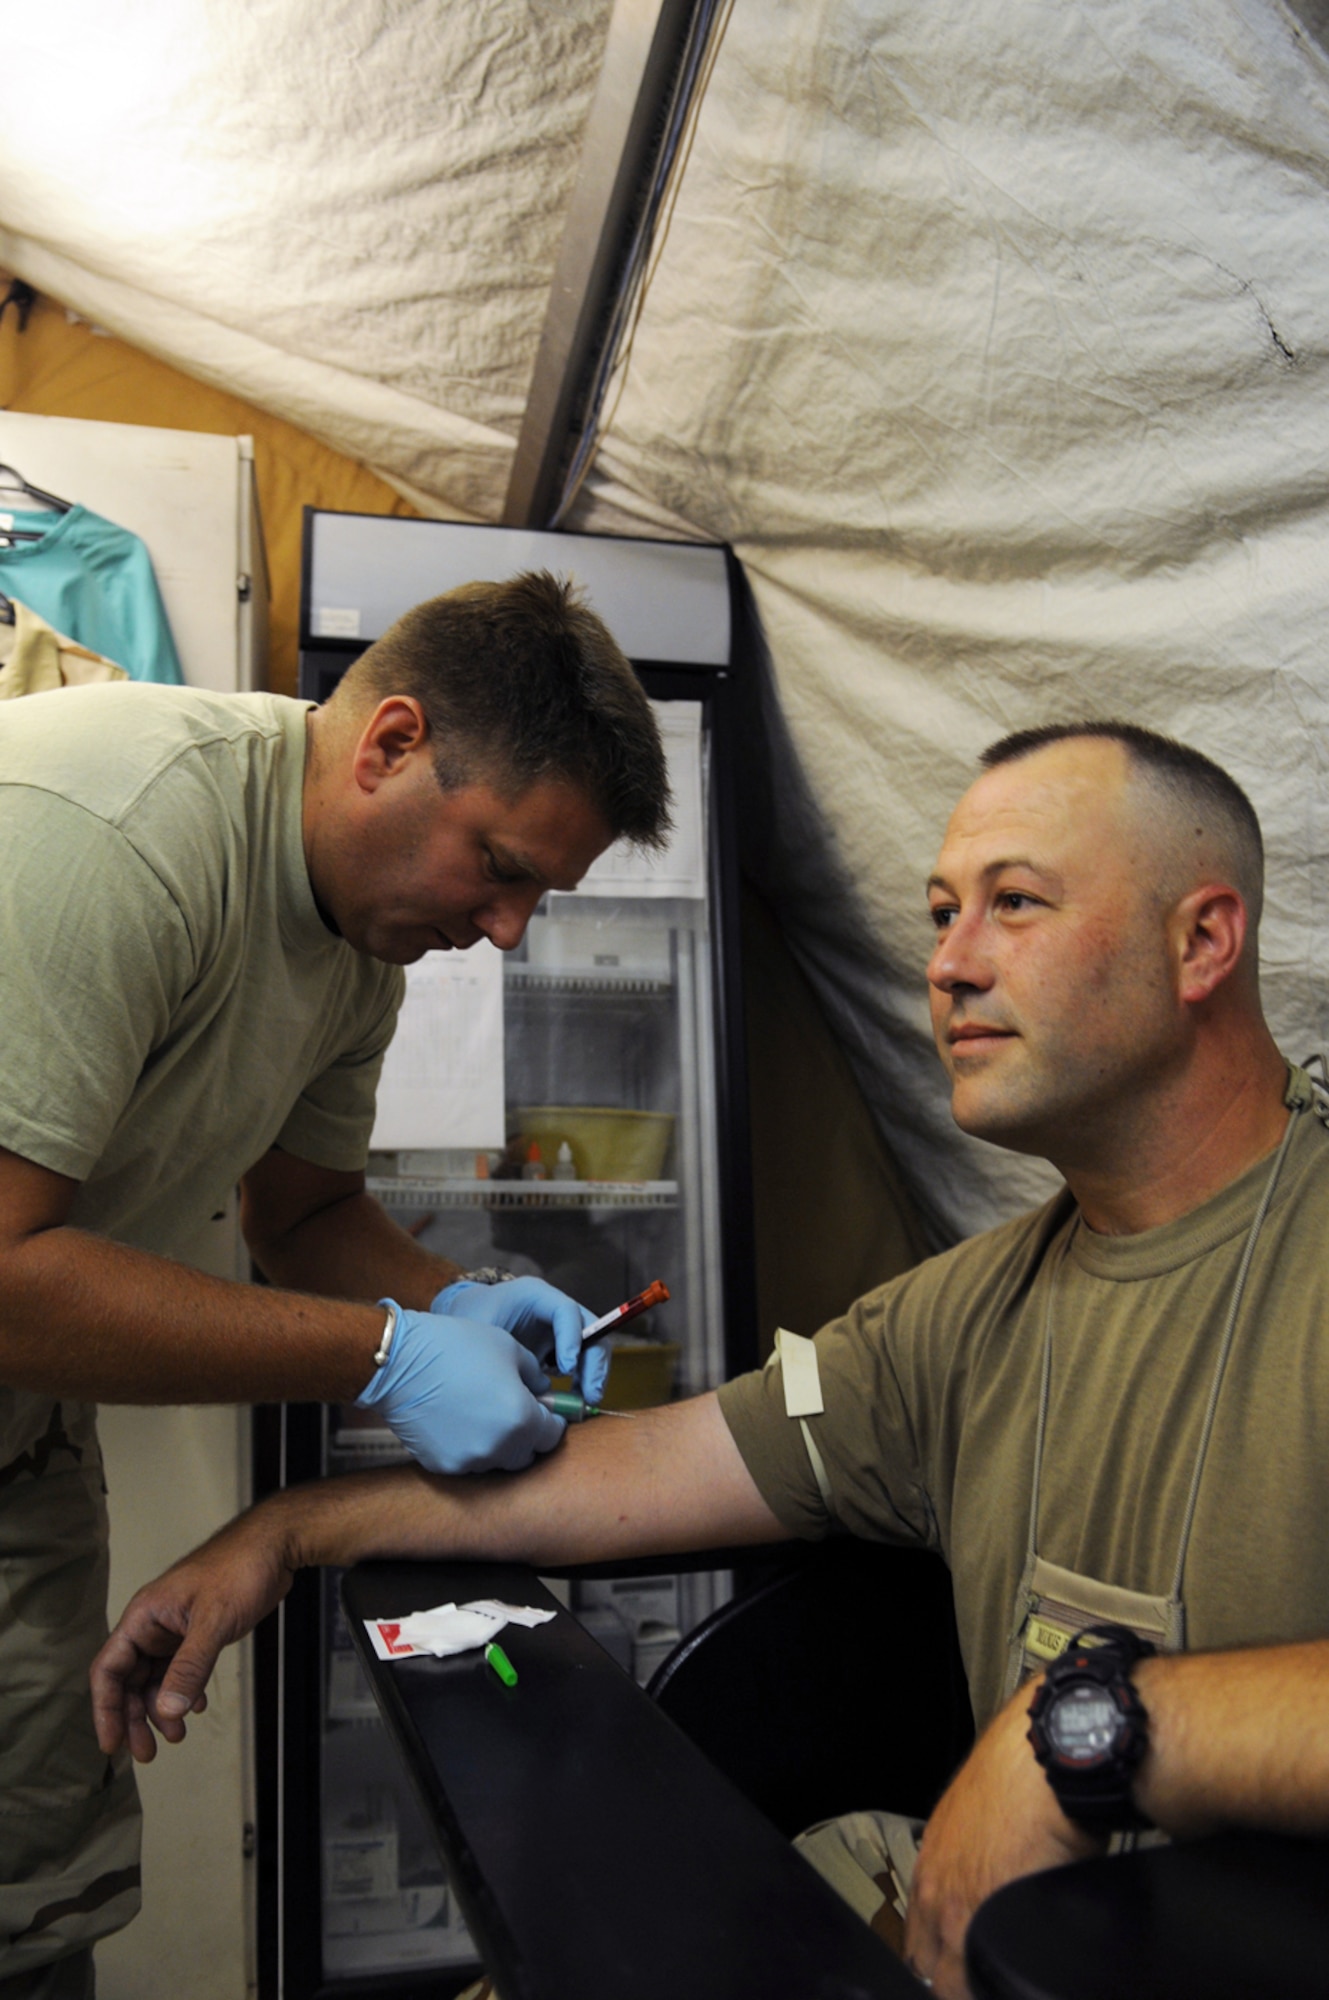 MANAS AIR BASE, Kyrgyz Republic - Master Sgt. Michael Clough, the independent duty medical technician from the 376th Expeditionary Medical Group, draws a blood sample from Master Sgt. Britian Yucum, 376th Expeditionary Medical Group, July 10. Sergeant Clough is deployed here from the Utah Air National Guard's 191st Air Refueling Squadron, based out of Salt Lake City International Airport. (U.S. Air Force photo / Airman 1st Class Ruth Holcomb) The message is ready to be sent with the following file or link attachments: